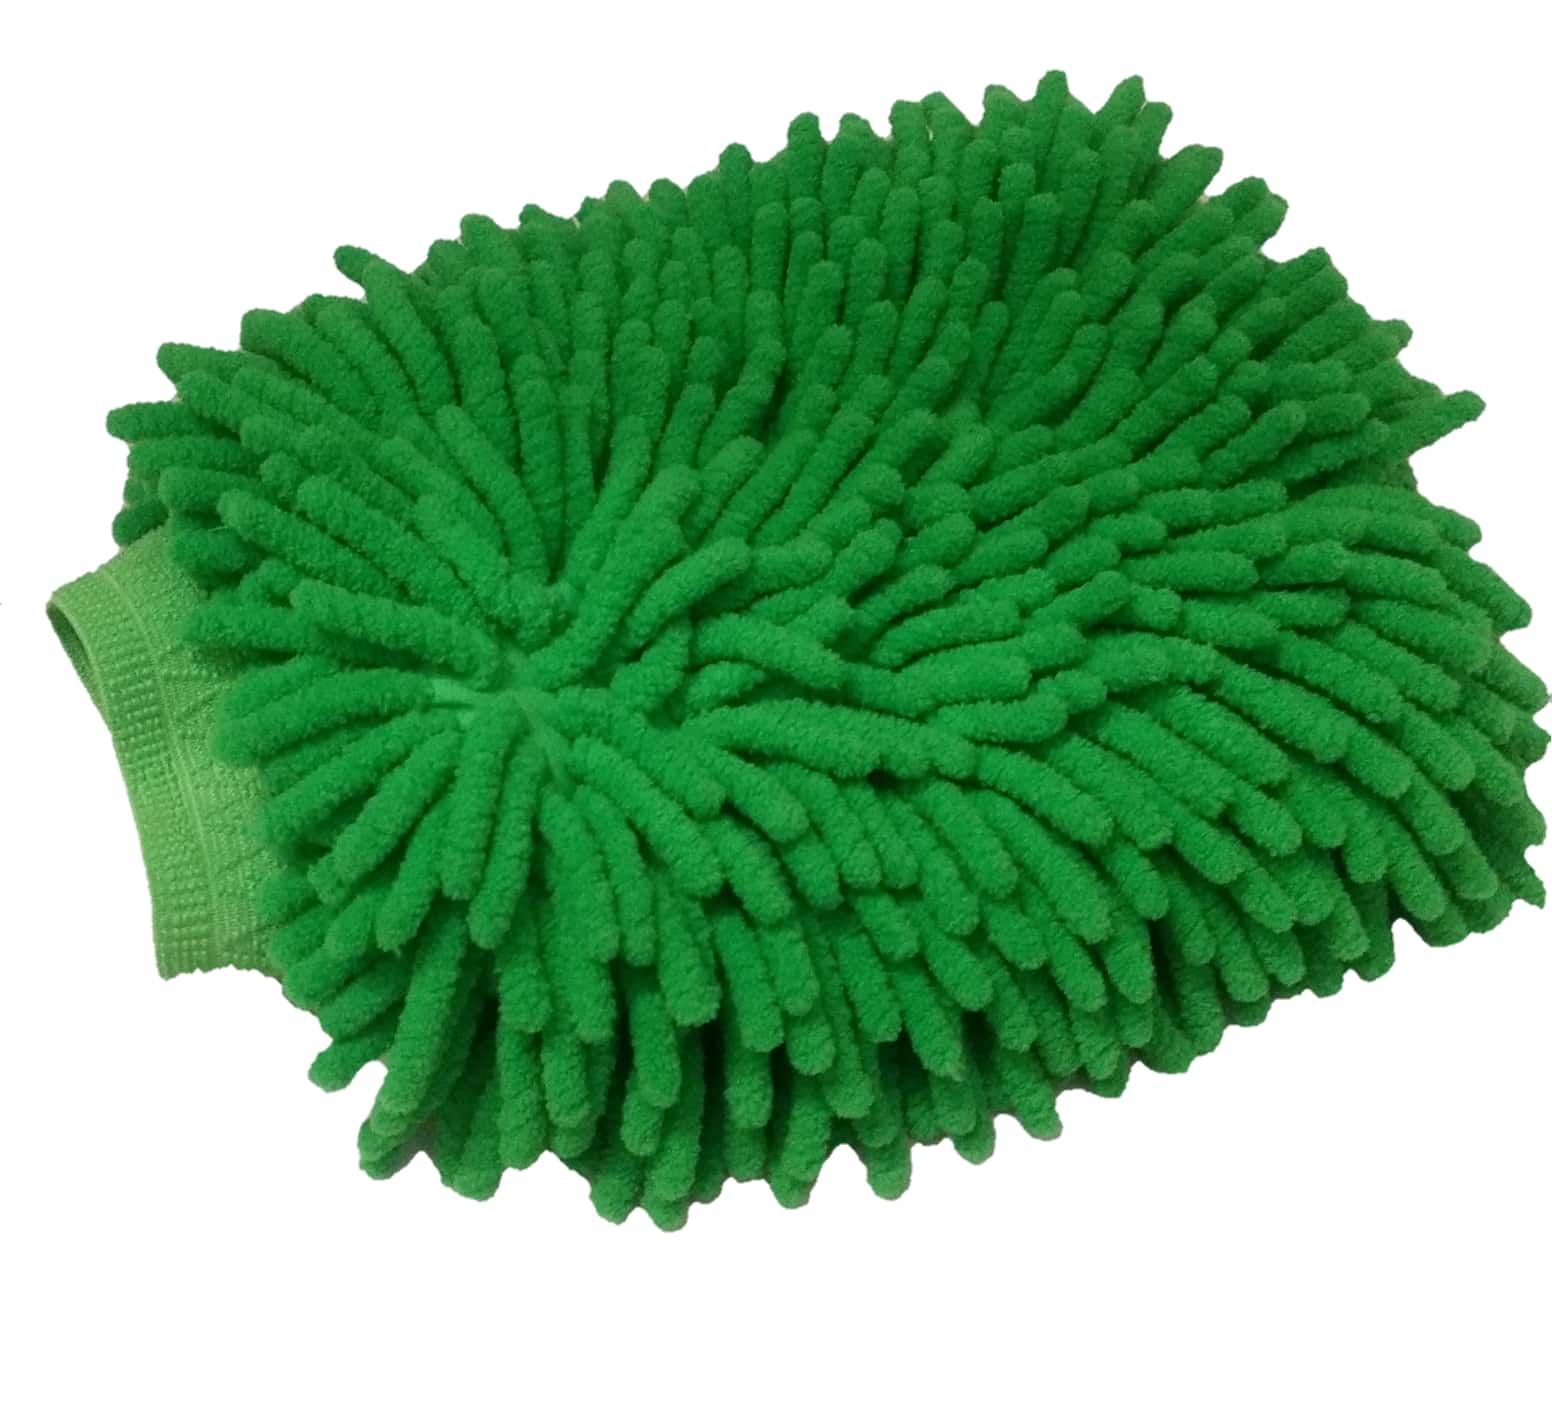 Sibba Premium Chenille Car Wash Mitt, Scratch-Free Microfiber Wash Glove,  Pack of 2, Soft Chenille Cleaning Mitt Green for Car Washing and Detailing